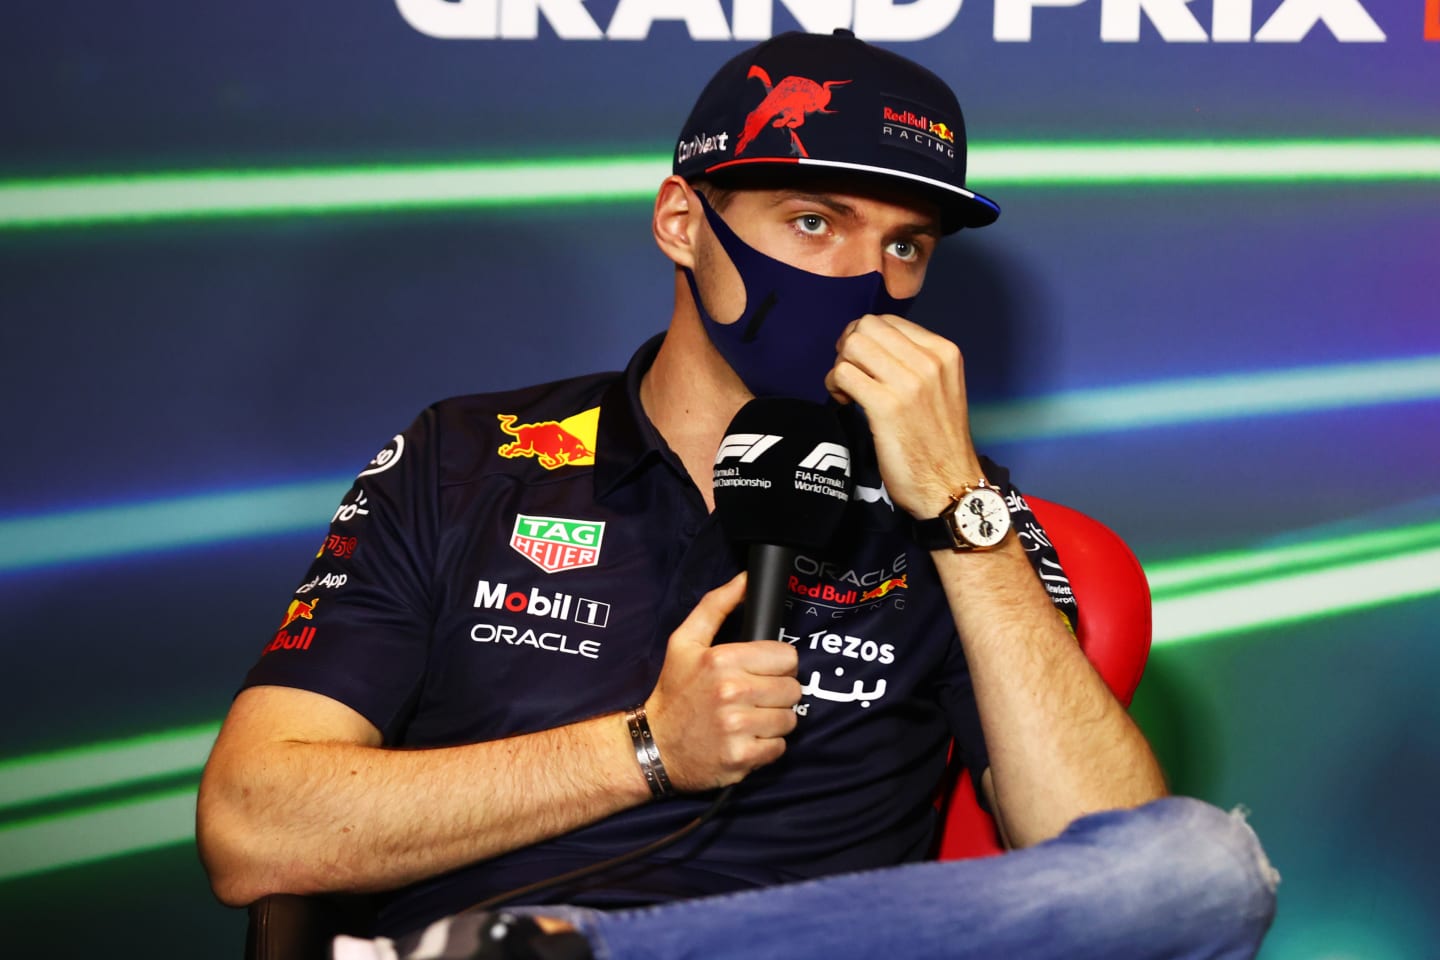 JEDDAH, SAUDI ARABIA - MARCH 25: Max Verstappen of the Netherlands and Oracle Red Bull Racing talks in the Drivers Press Conference before practice ahead of the F1 Grand Prix of Saudi Arabia at the Jeddah Corniche Circuit on March 25, 2022 in Jeddah, Saudi Arabia. (Photo by Dan Istitene - Formula 1/Formula 1 via Getty Images)